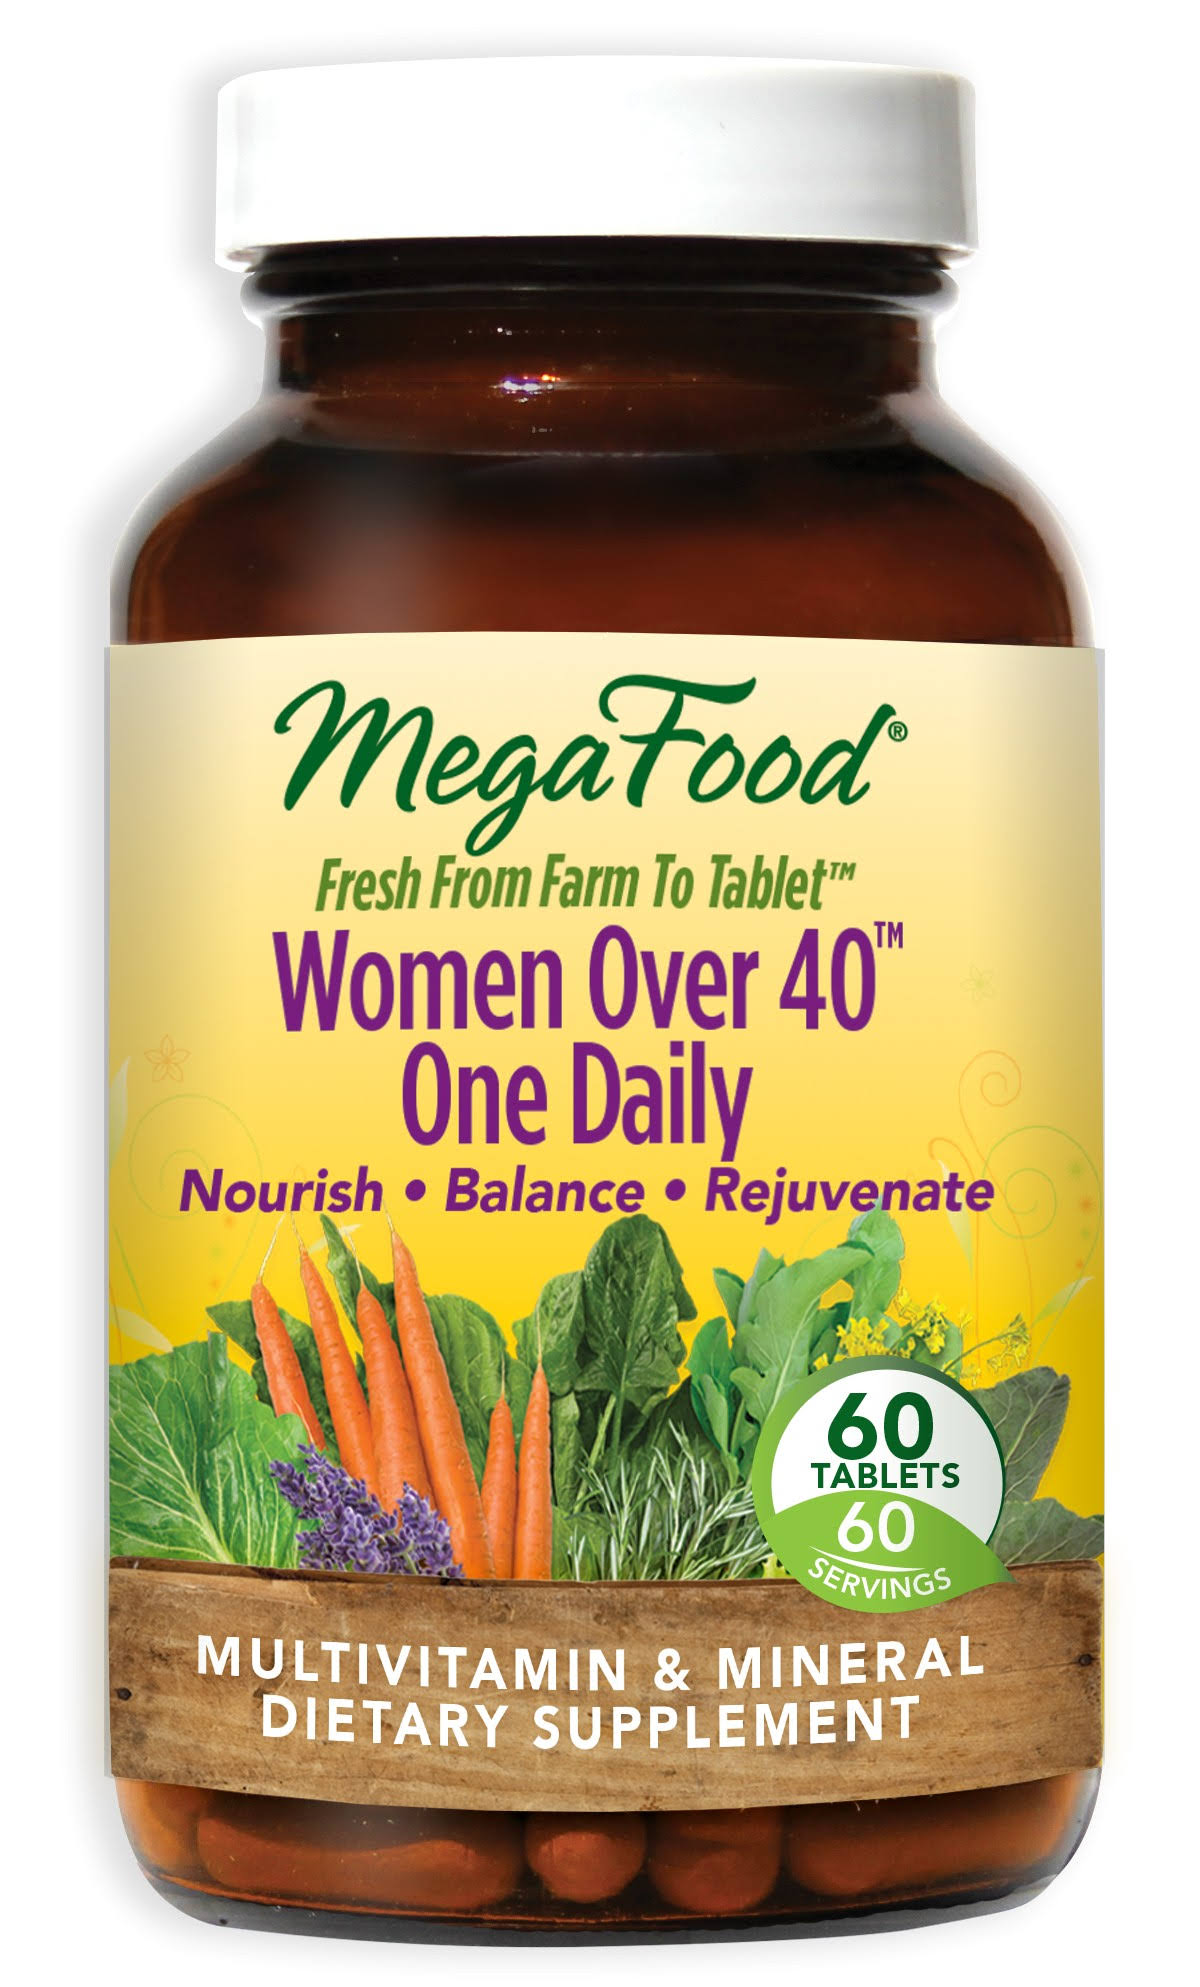 Megafood Women Over 40 One Daily Supplement - 60 Count